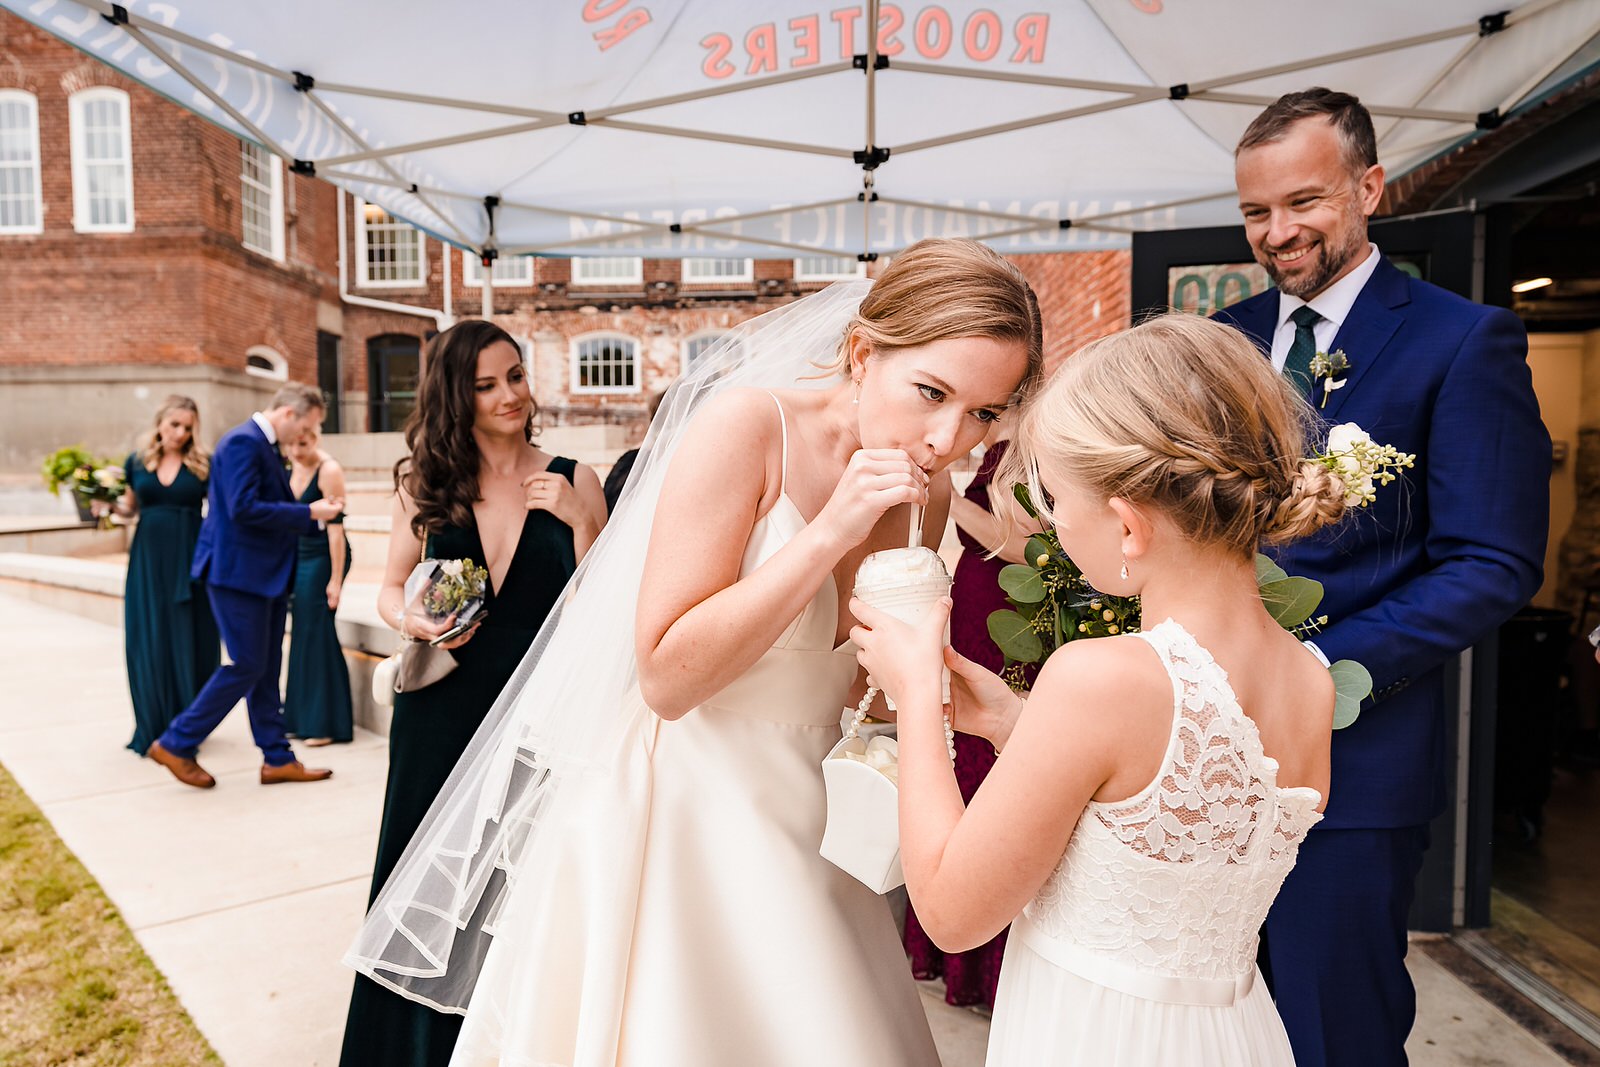 Bride takes a break to have some of the flower girl's milkshake before the ceremony